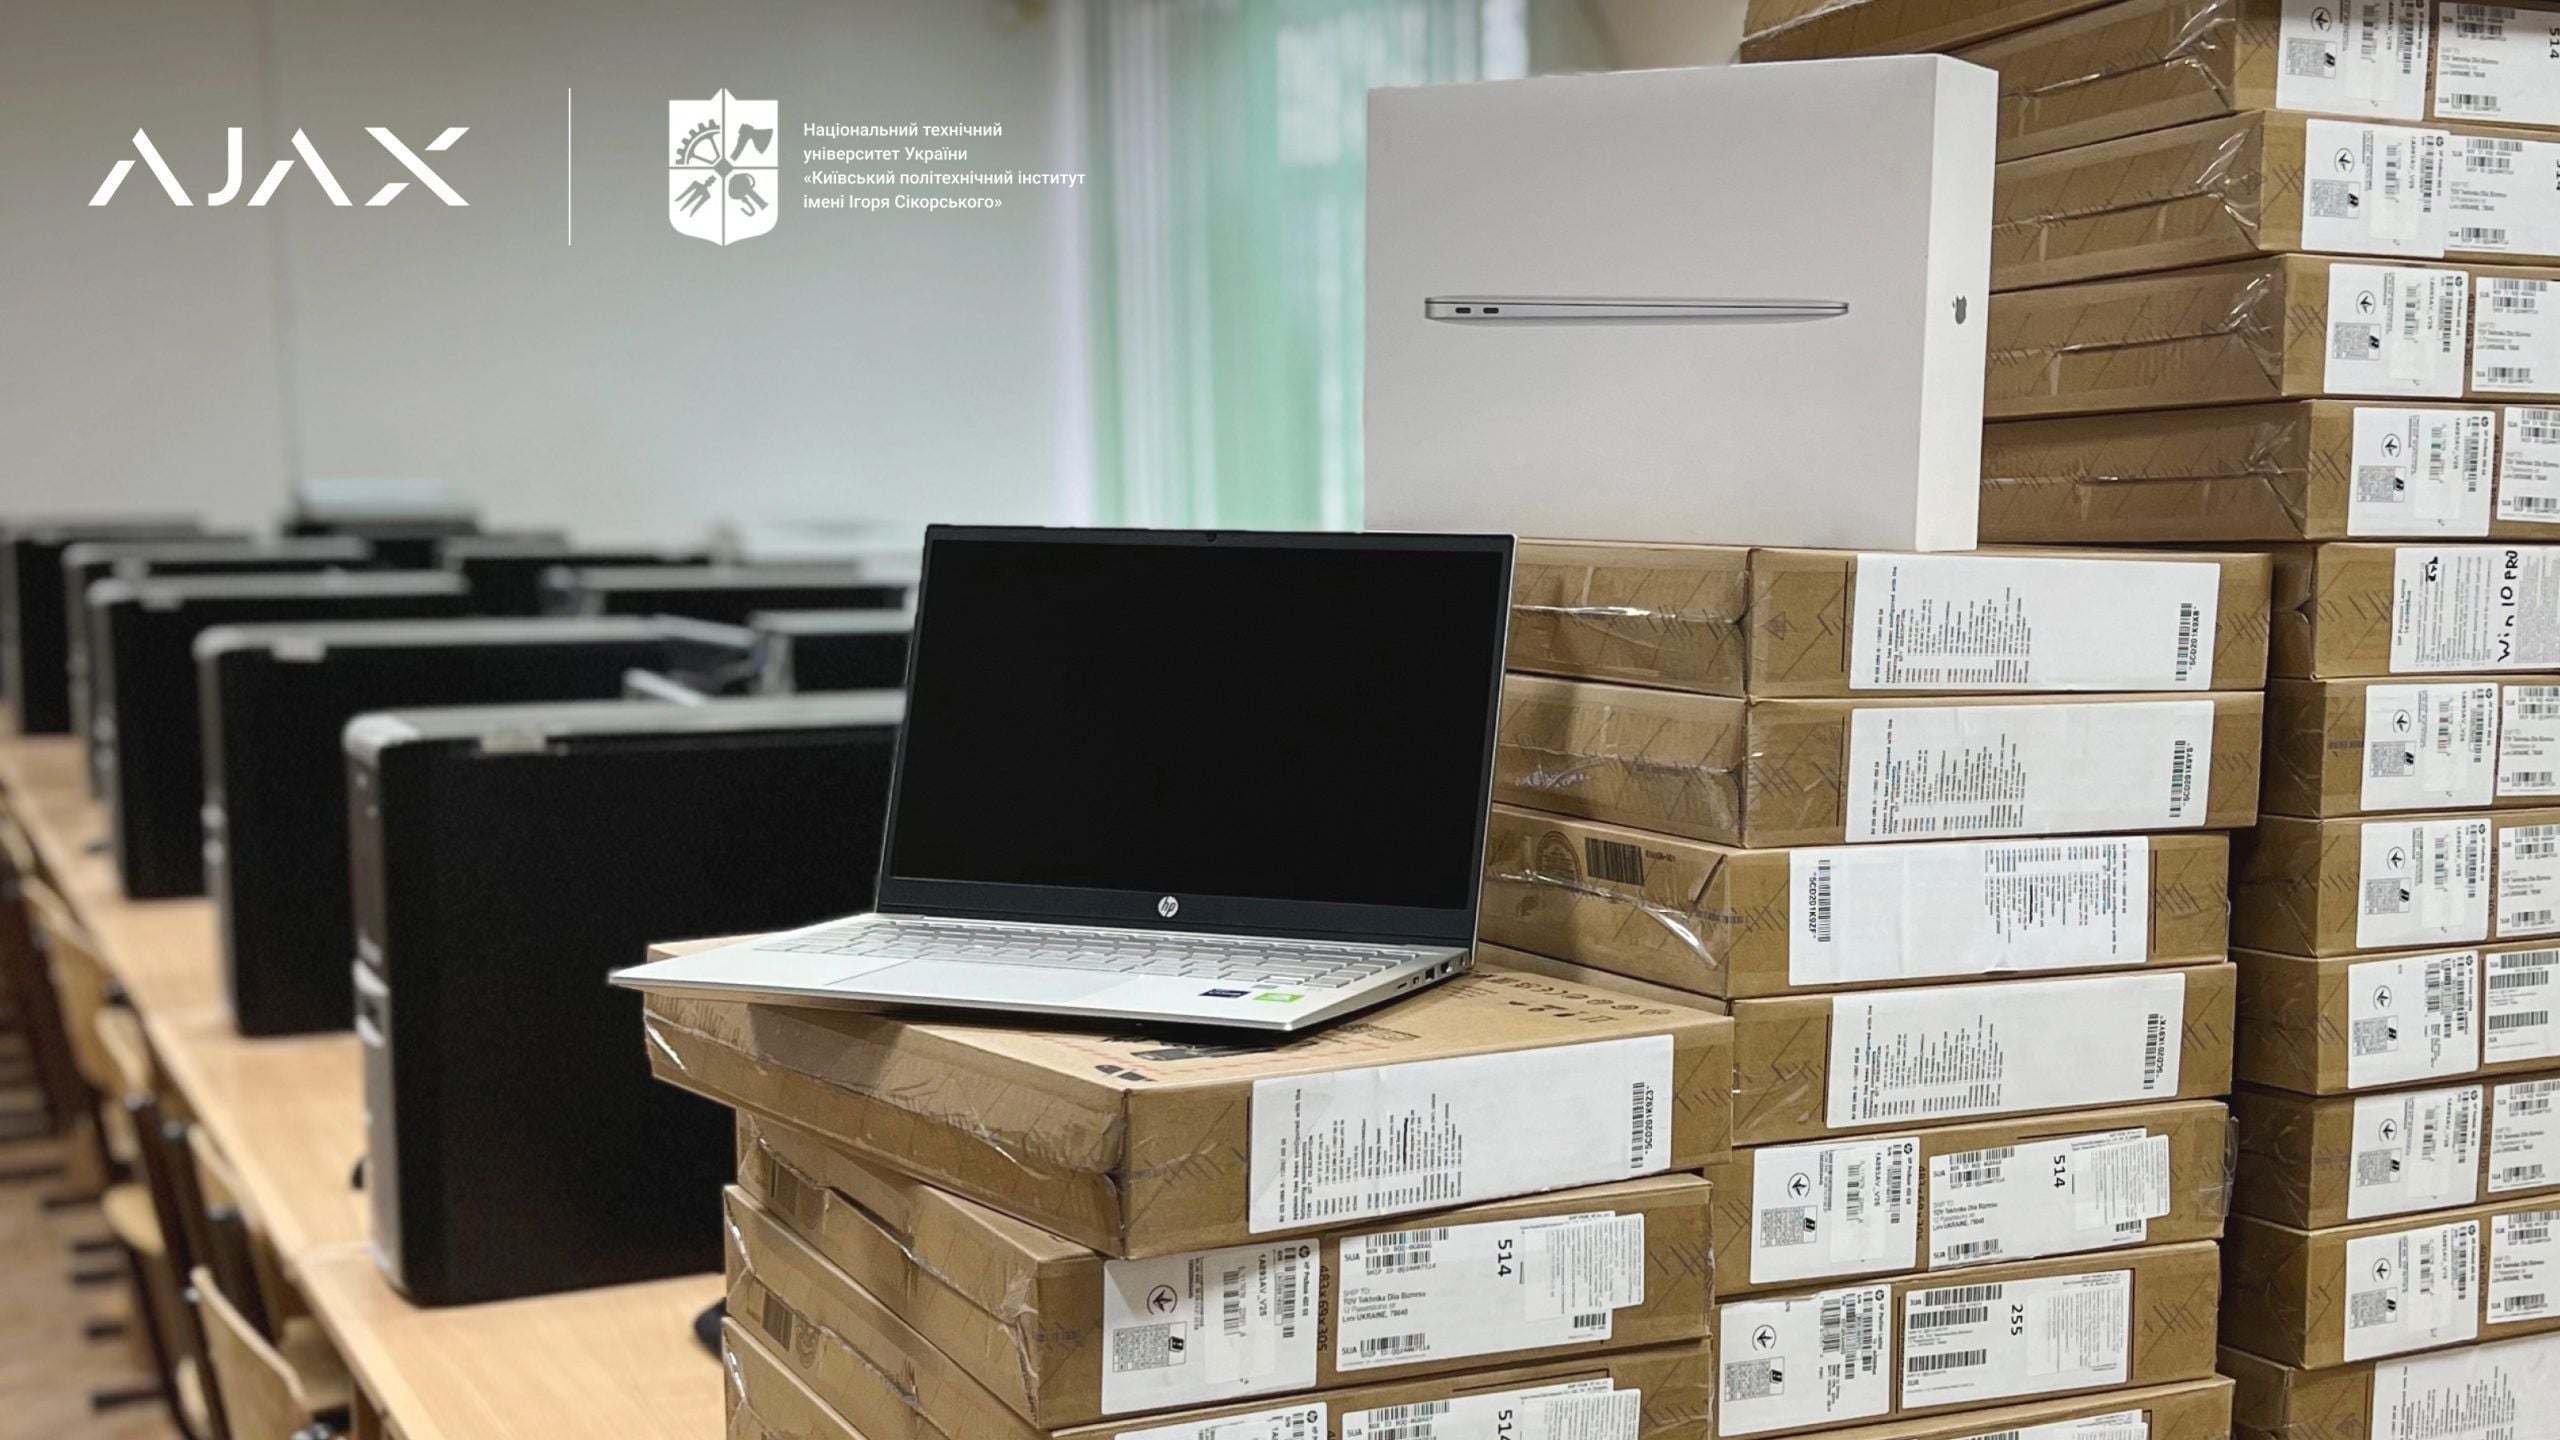 Ajax Systems provided equipment for teachers of the Department of SPSCS at Kyiv Polytechnic Institute